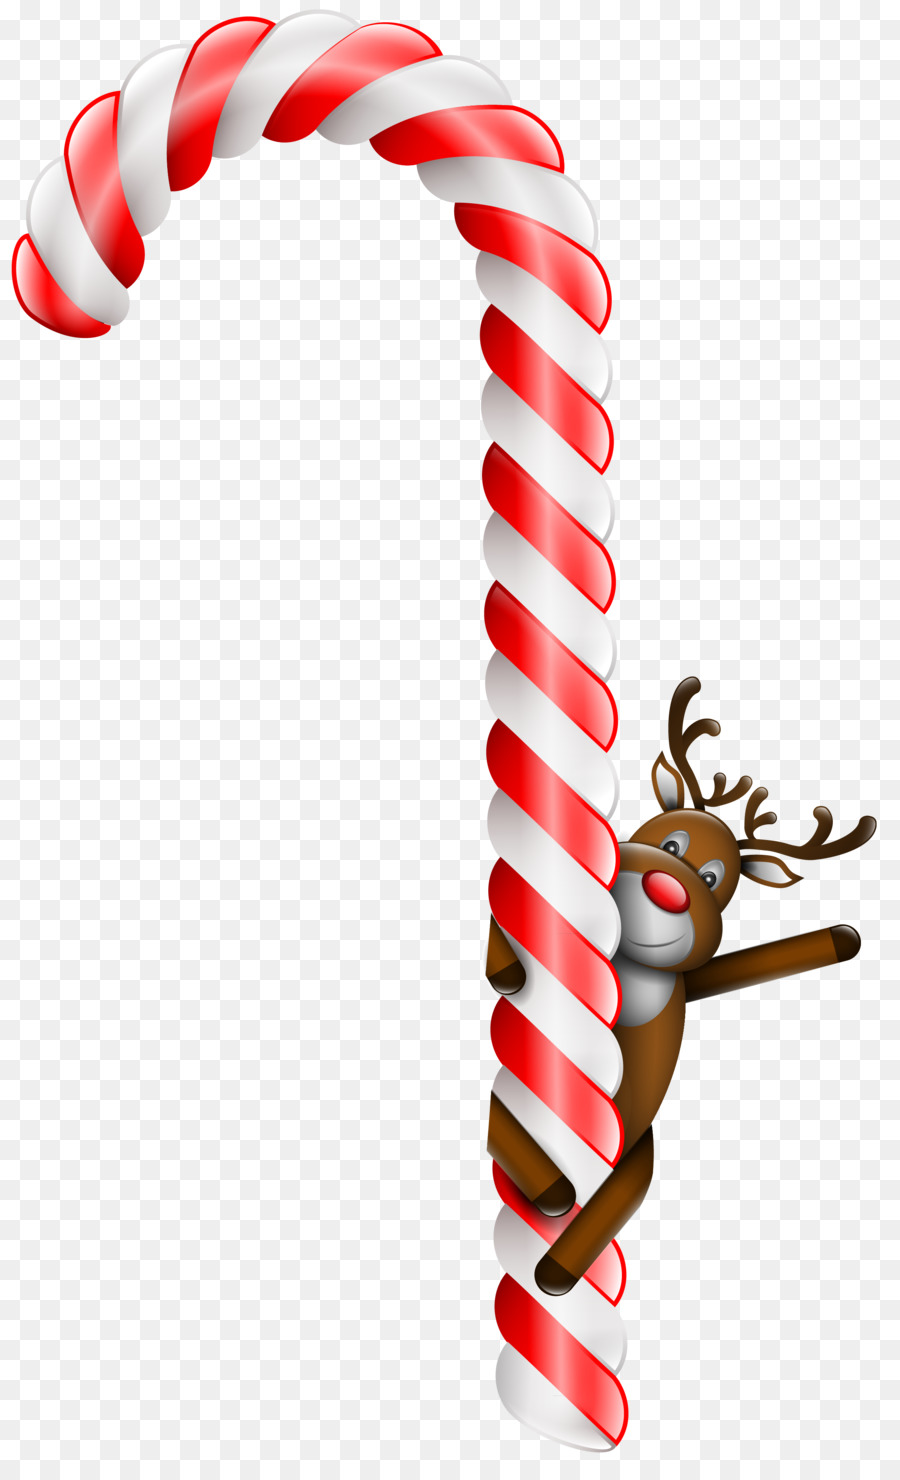 Candy cane Stick candy Lollipop Christmas Clip art - Candycane Pictures png download - 2304*3760 - Free Transparent Candy Cane png Download.